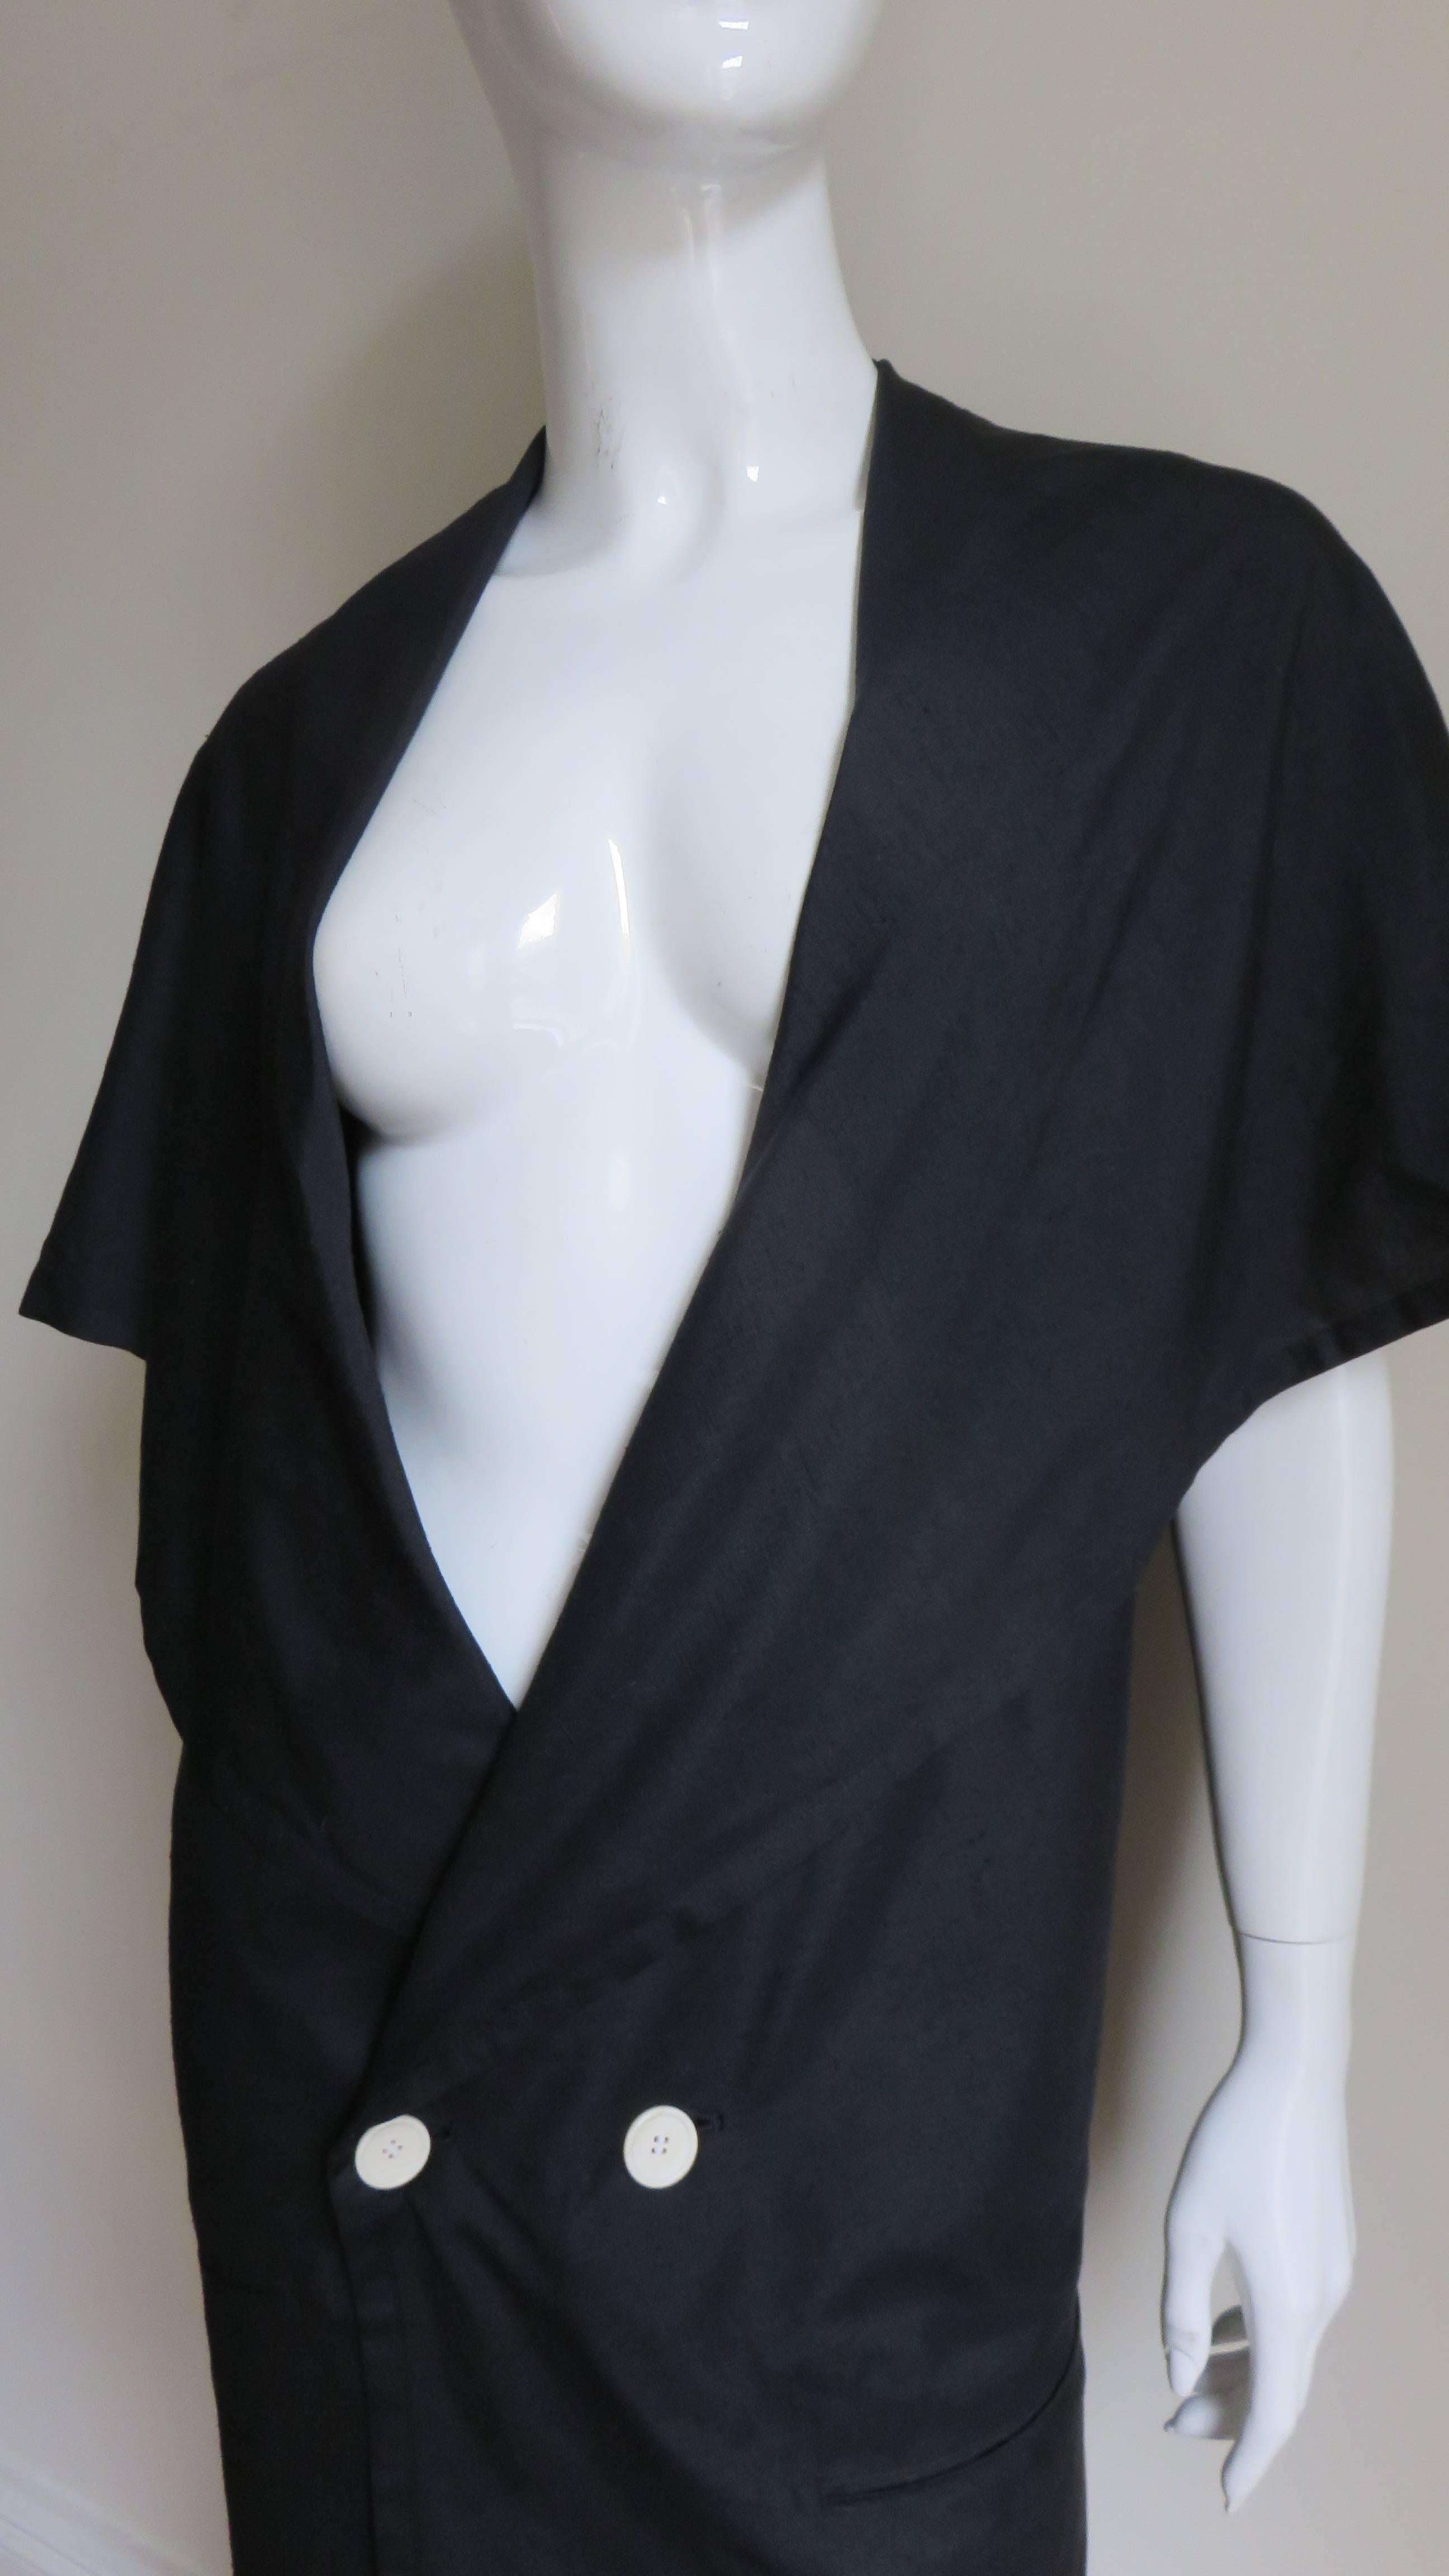 A fabulous black silk jacket from Yohji Yamamoto.  It is double breasted with 2 off white buttons and wide cape lapels which drape over the shoulders and upper arms.  This drape forms an asymmetric panel at the back long and pointed on one side and